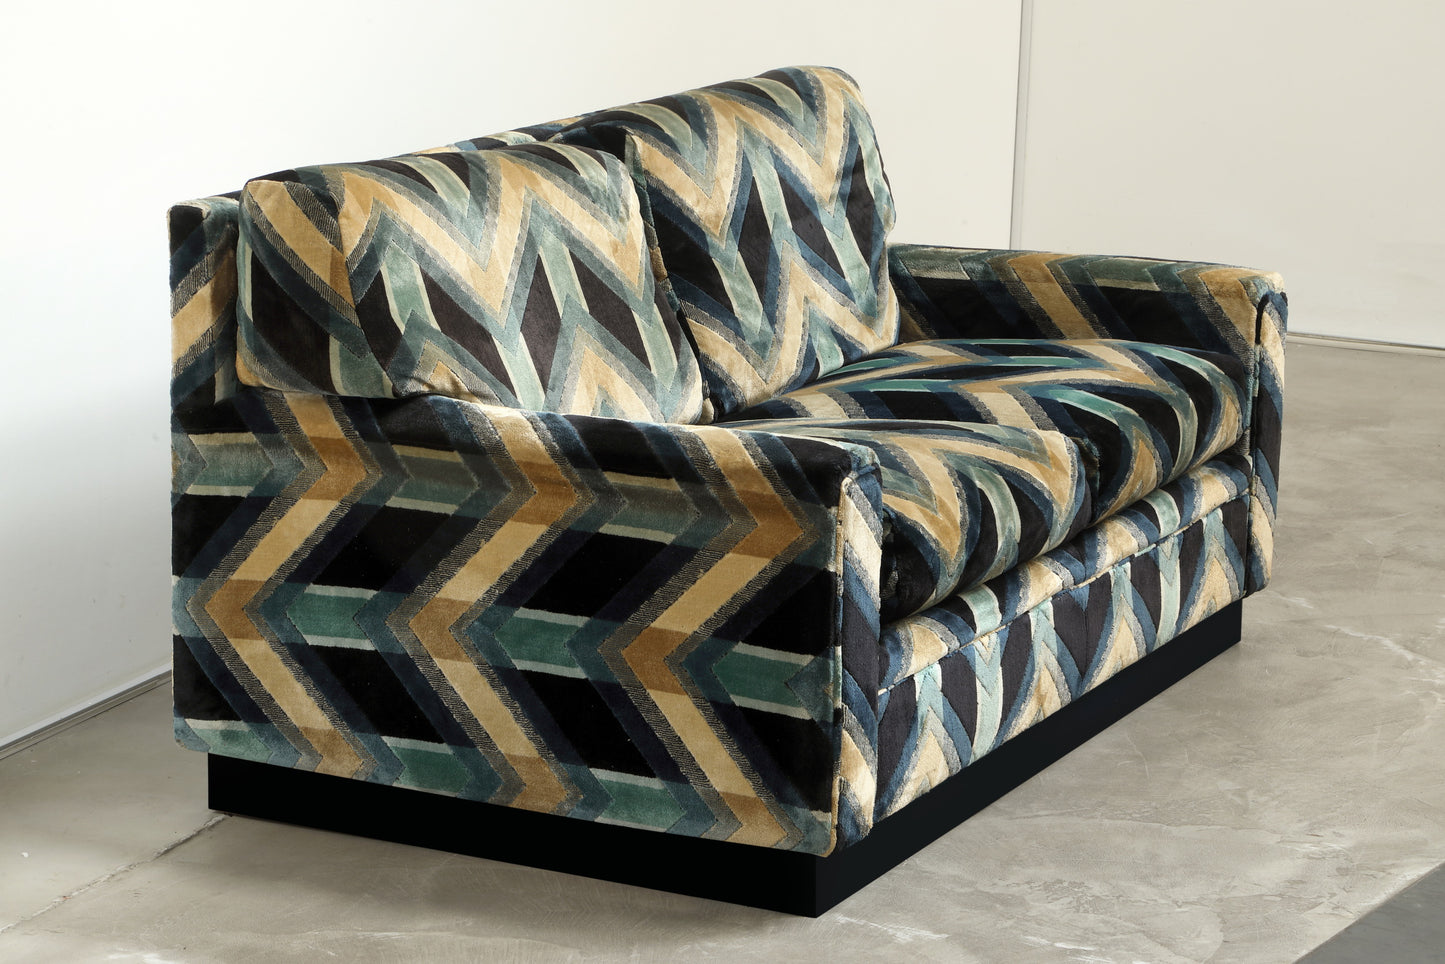 Dada Industrial Design two-seater sofa from the 70s